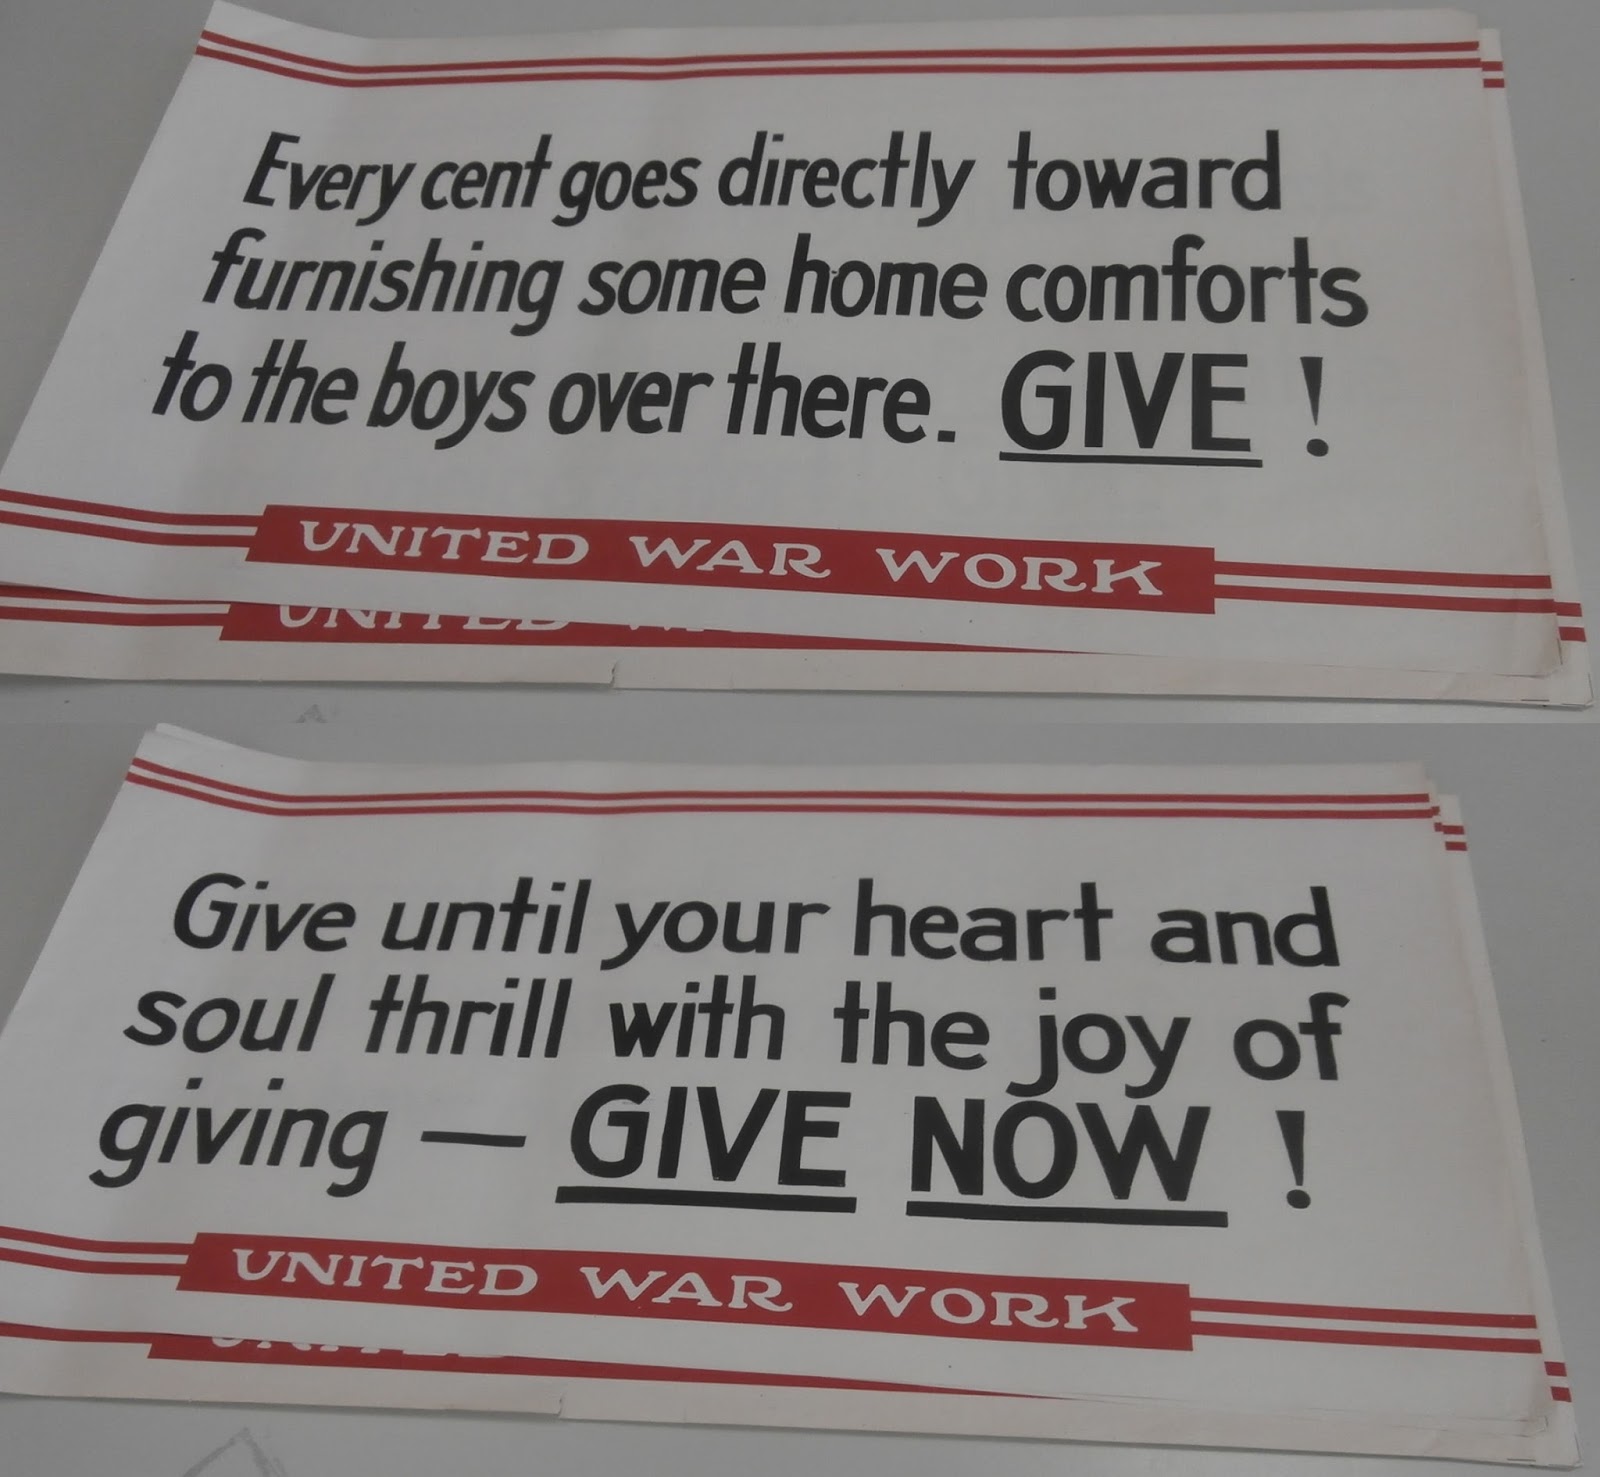 United war work posters urging people to donate to the war effort.